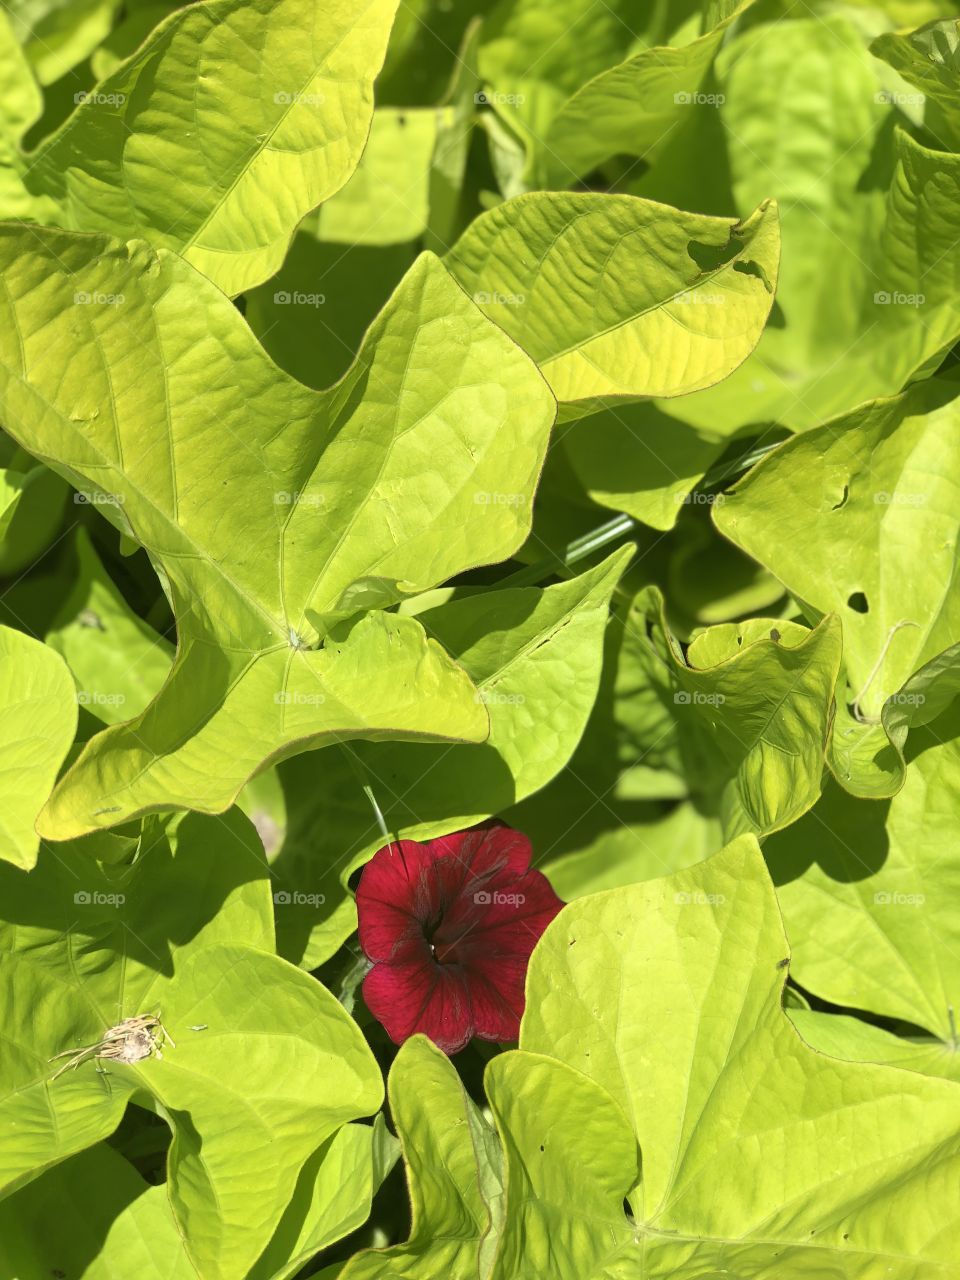 Lone red flower among a bed of green